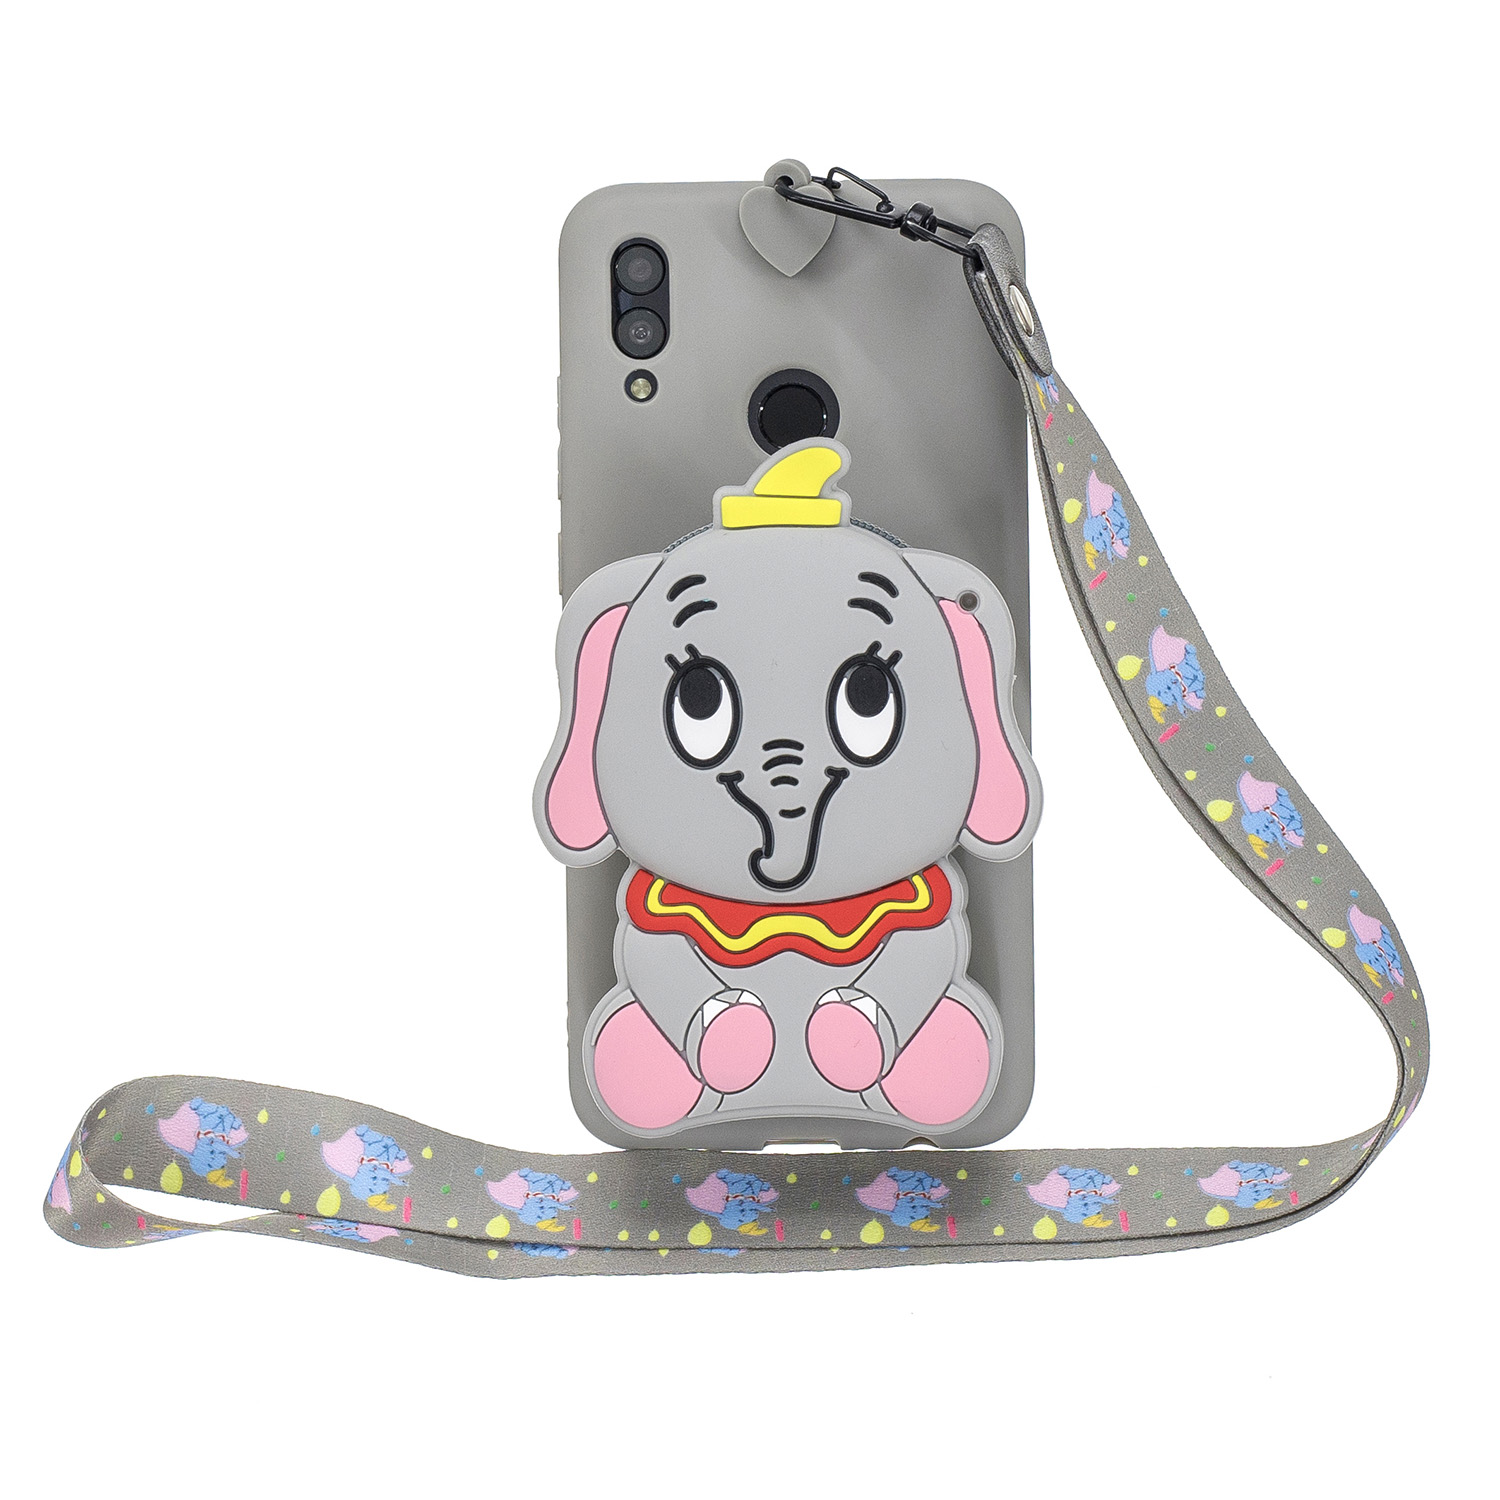 For HUAWEI Y6 2019 Y7 2019 Y9 2019 Cartoon Full Protective TPU Mobile Phone Cover with Mini Coin Purse+Cartoon Hanging Lanyard 8 grey elephant